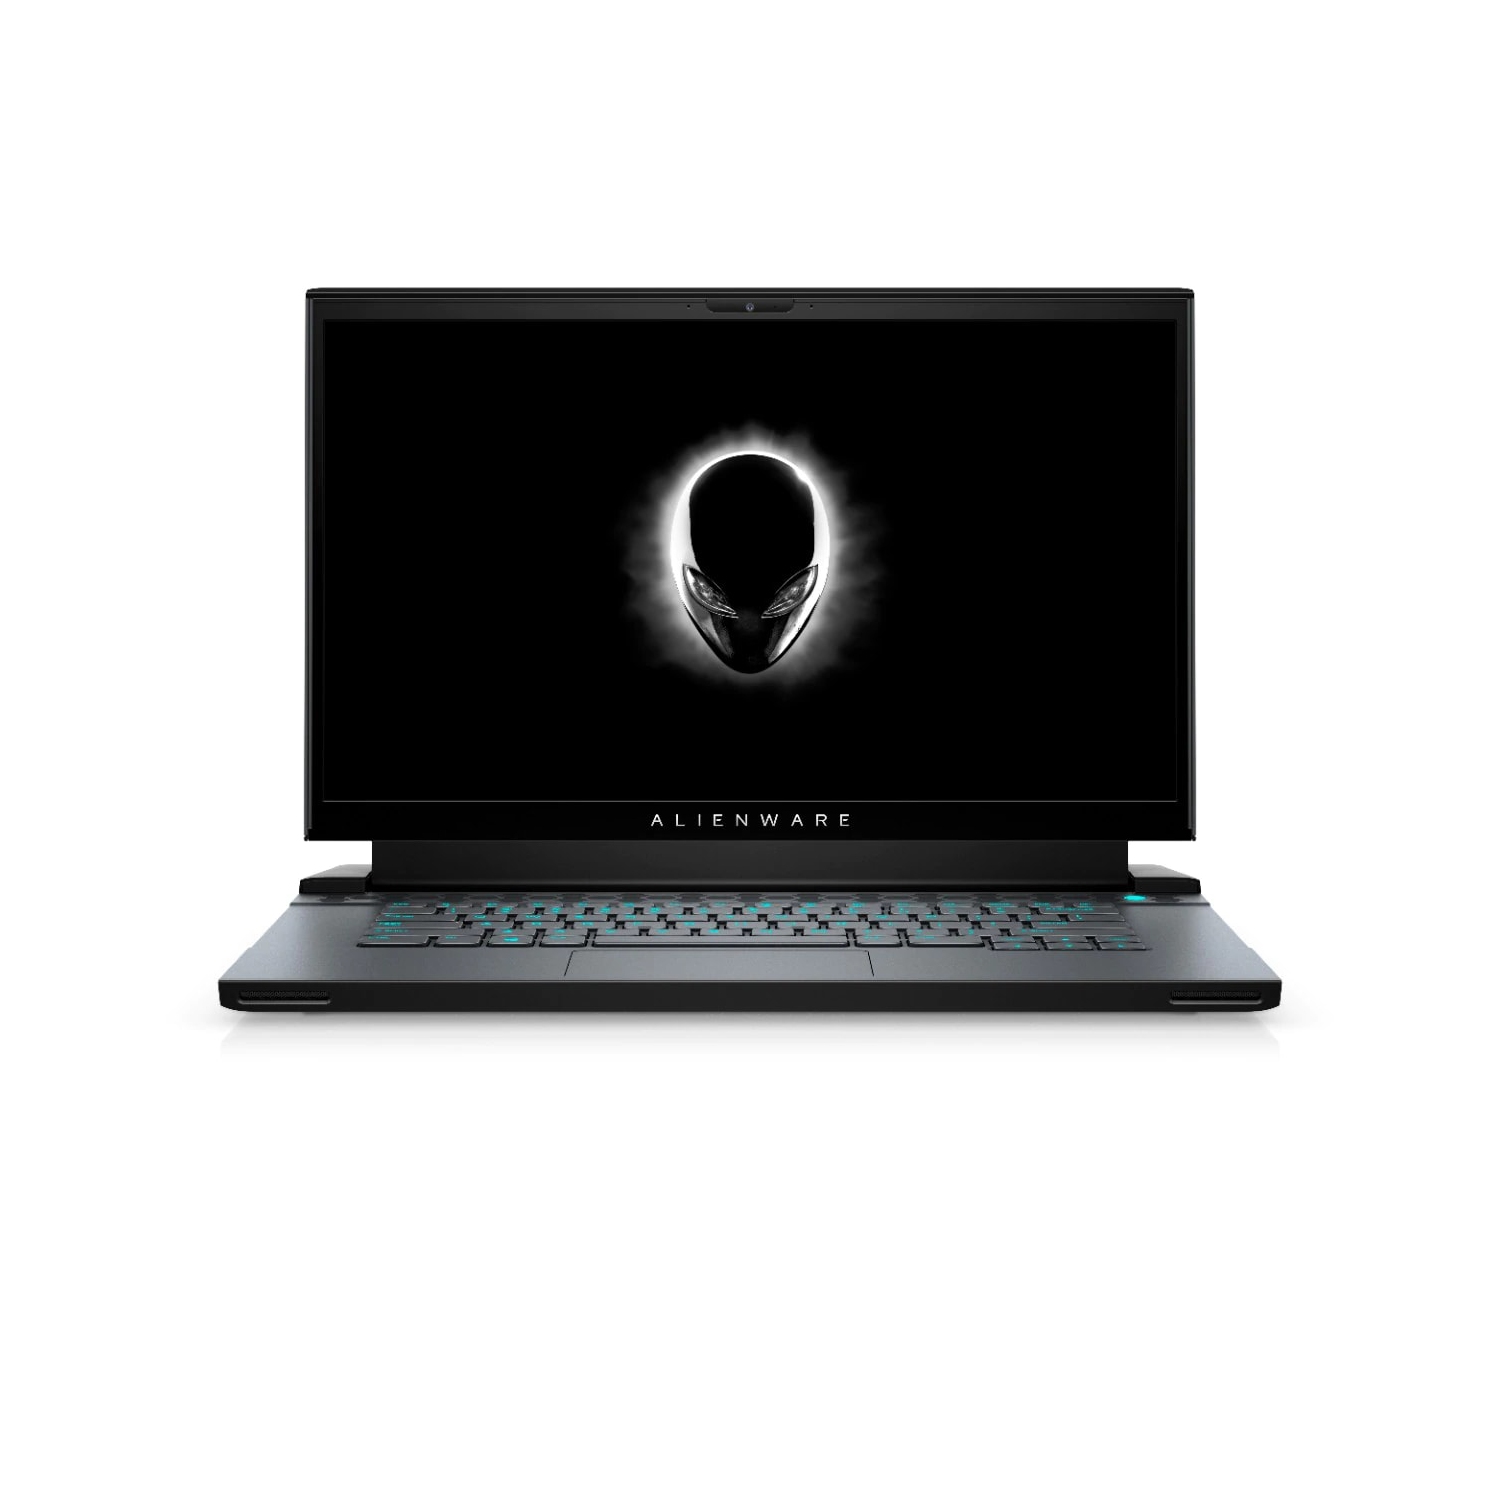 Refurbished (Excellent) - Dell Alienware m15 R4 Gaming Laptop (2021), 15.6" FHD, Core i7, 2TB SSD, 16GB RAM, RTX 3070, 8 Cores @ 5 GHz, 10th Gen CPU Certified Refurbished